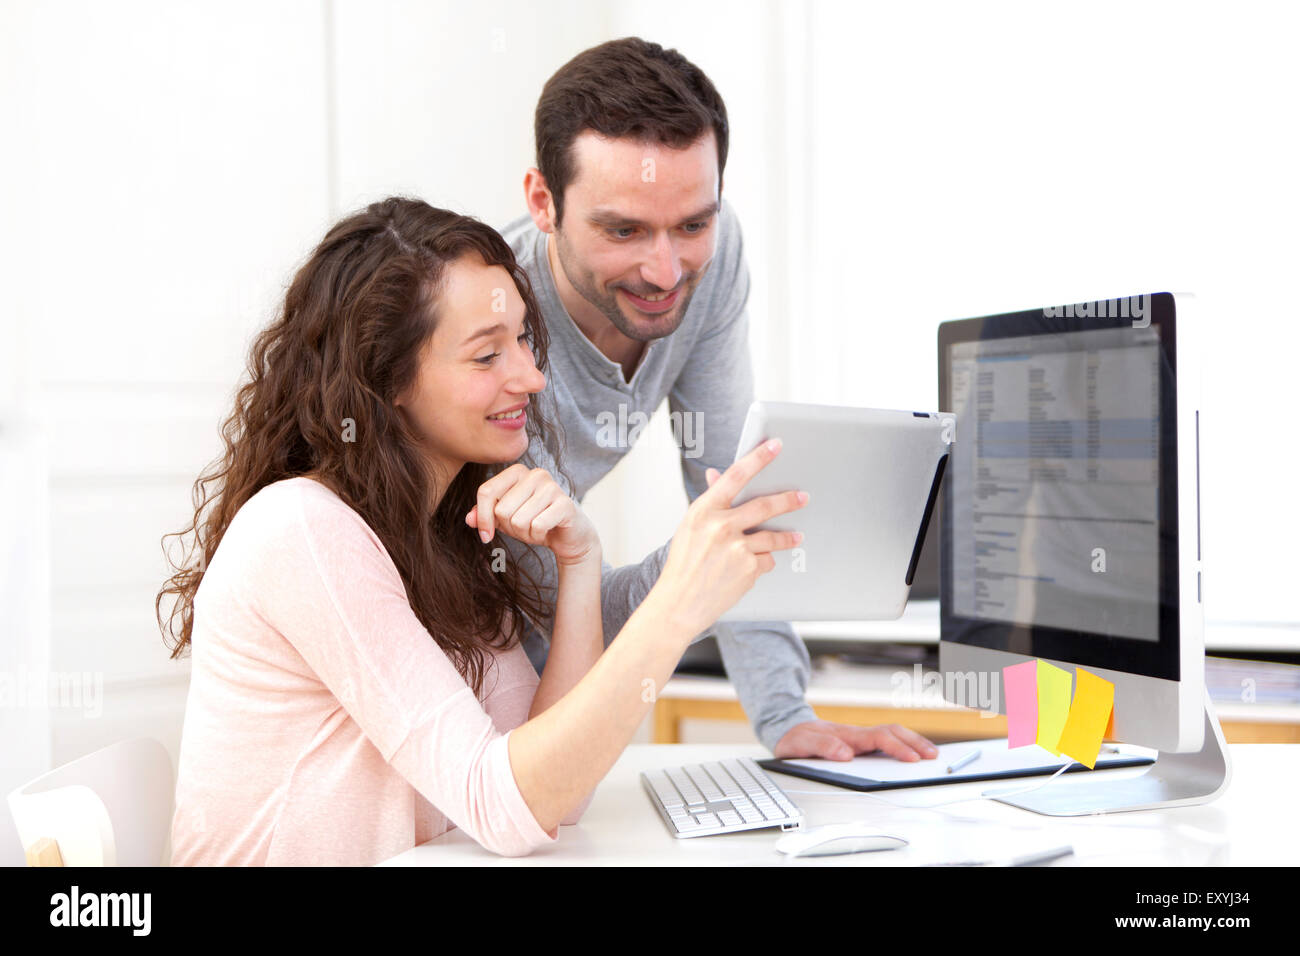 View of Woman working on tablet with her co-worker Stock Photo